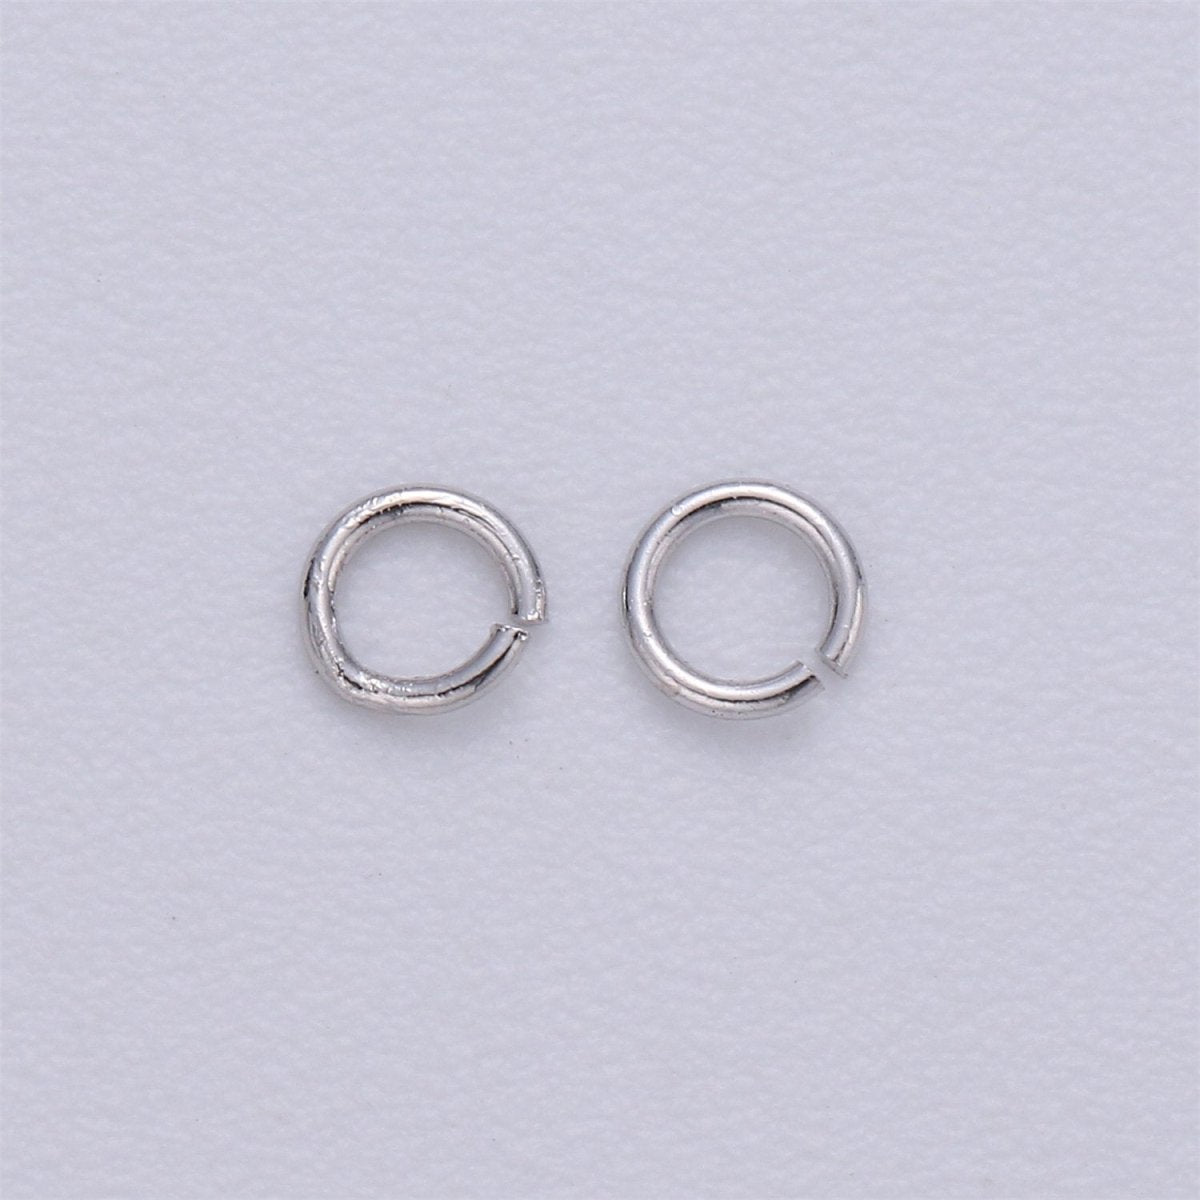 450 Pcs Silver Plated, Gold Plated, Gun Metal, Rose Gold Dainty O Shaped Jump Rings 3mm Open Jump Ring 24 gauge 0.50mm for Supply - DLUXCA